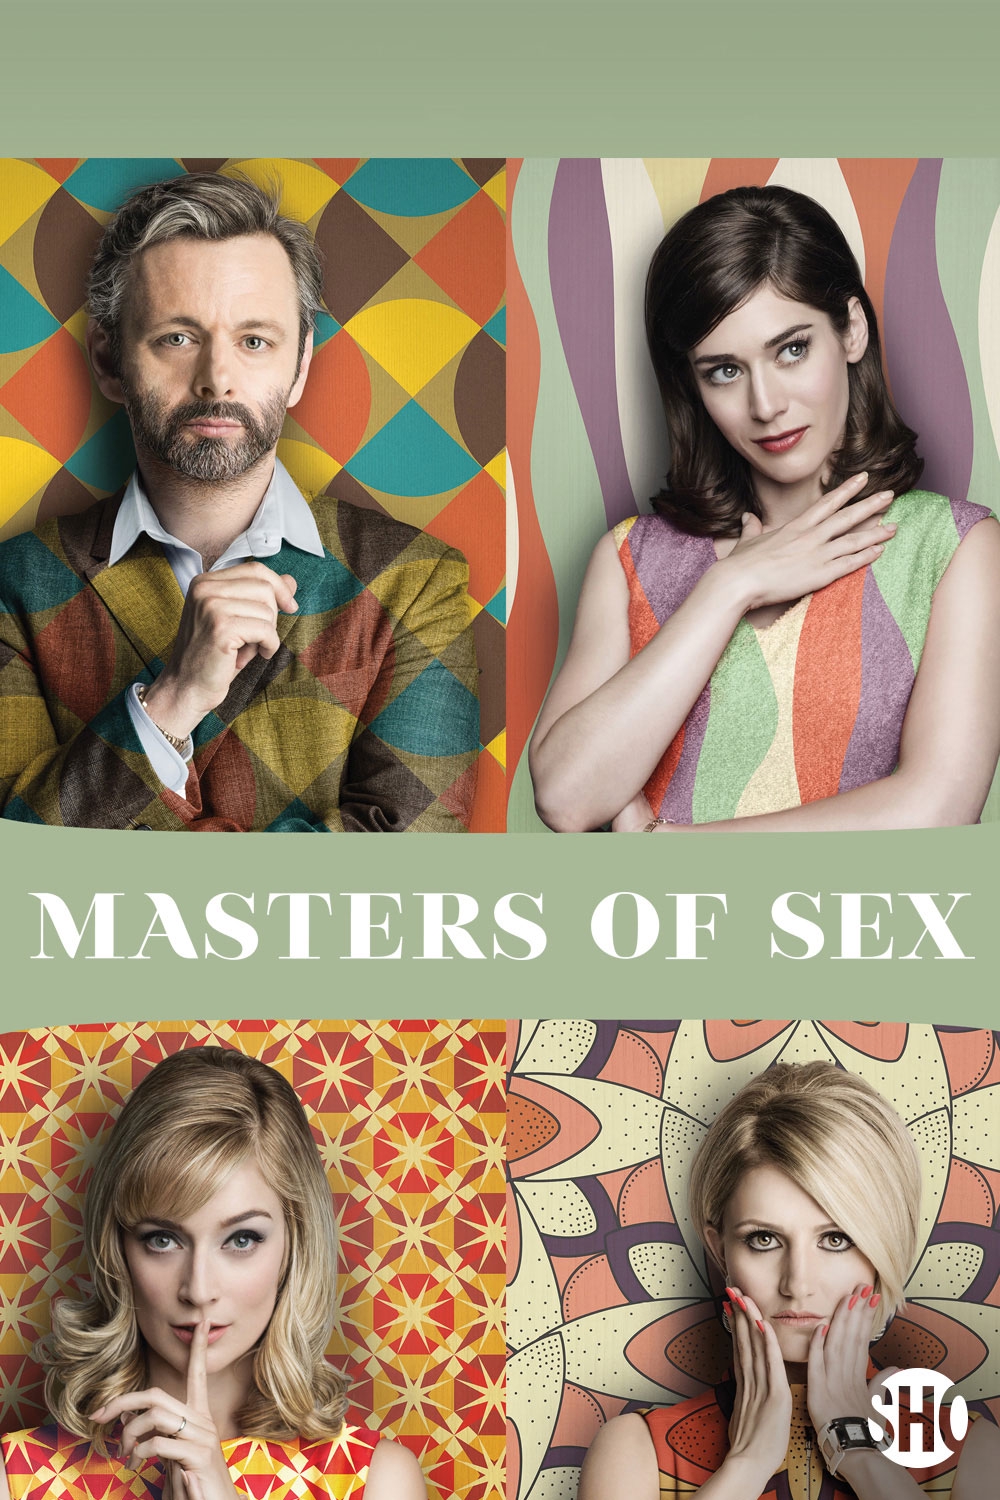 The masters of sex in Nagoya